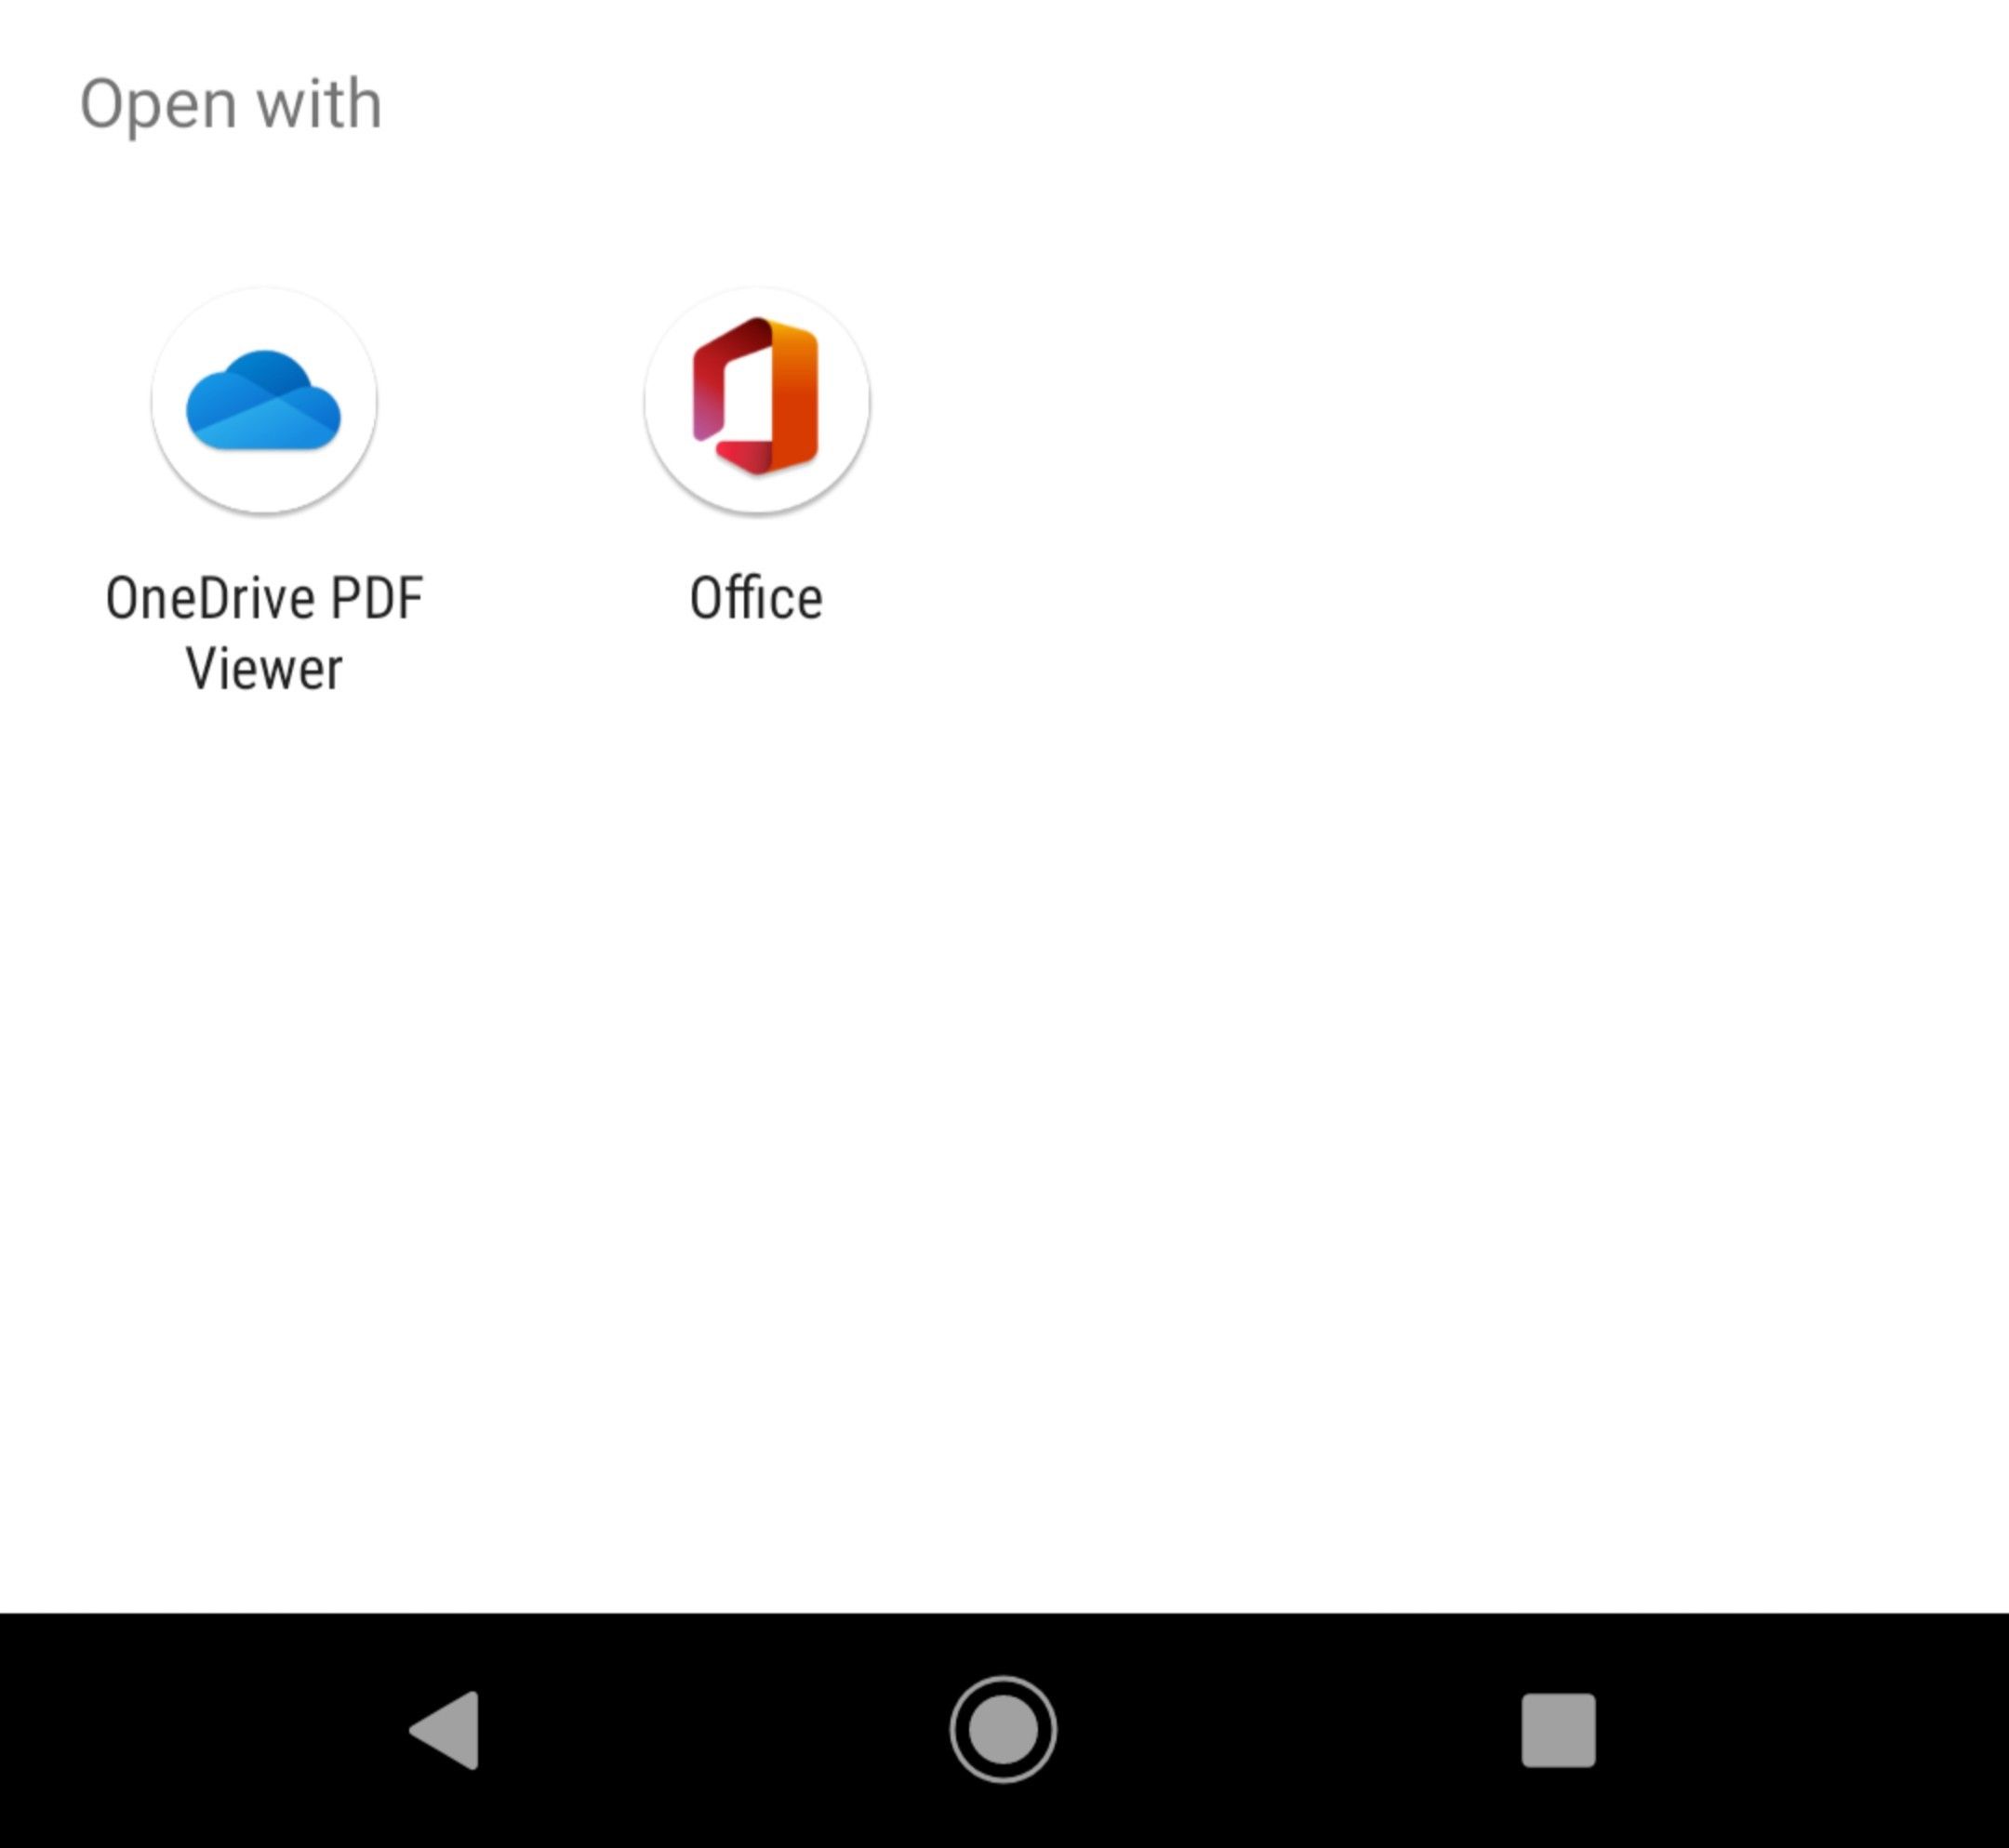 Edge on Android isn't available for opening PDFs - Microsoft Community Hub